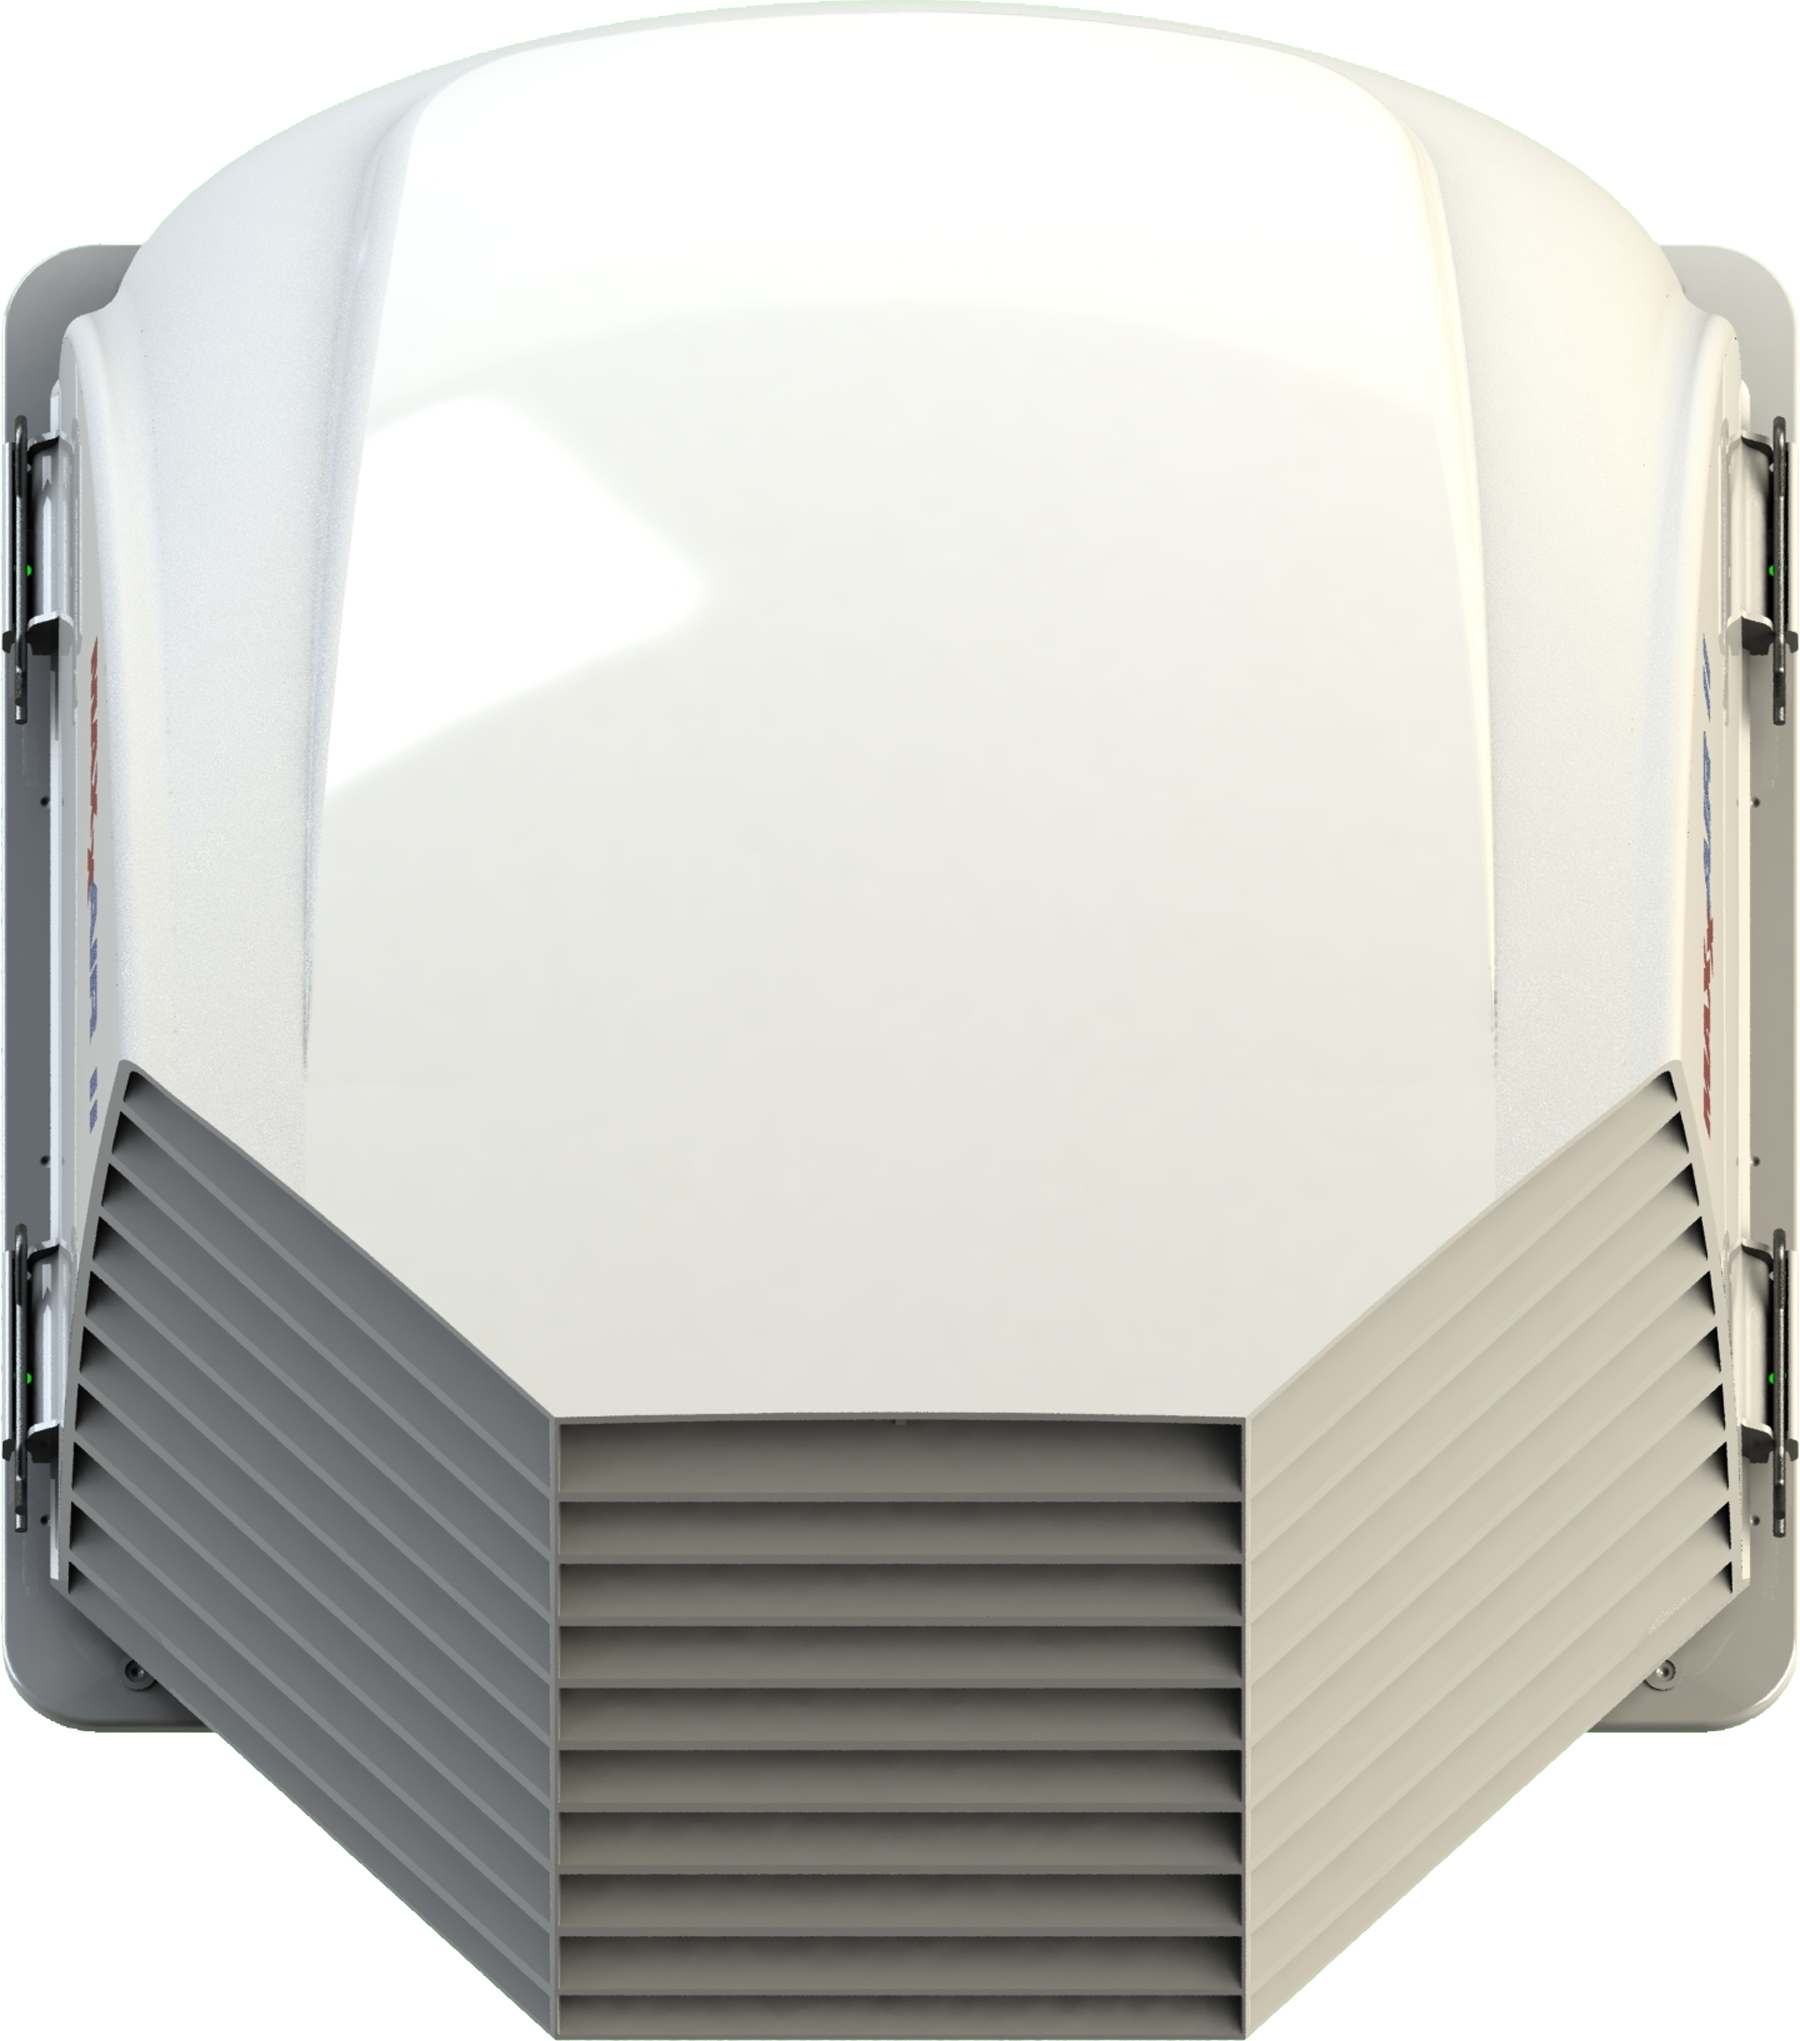 Maxx Air II Vent Corp 00933081 New Style RV Roof Vent Cover - Translucent White